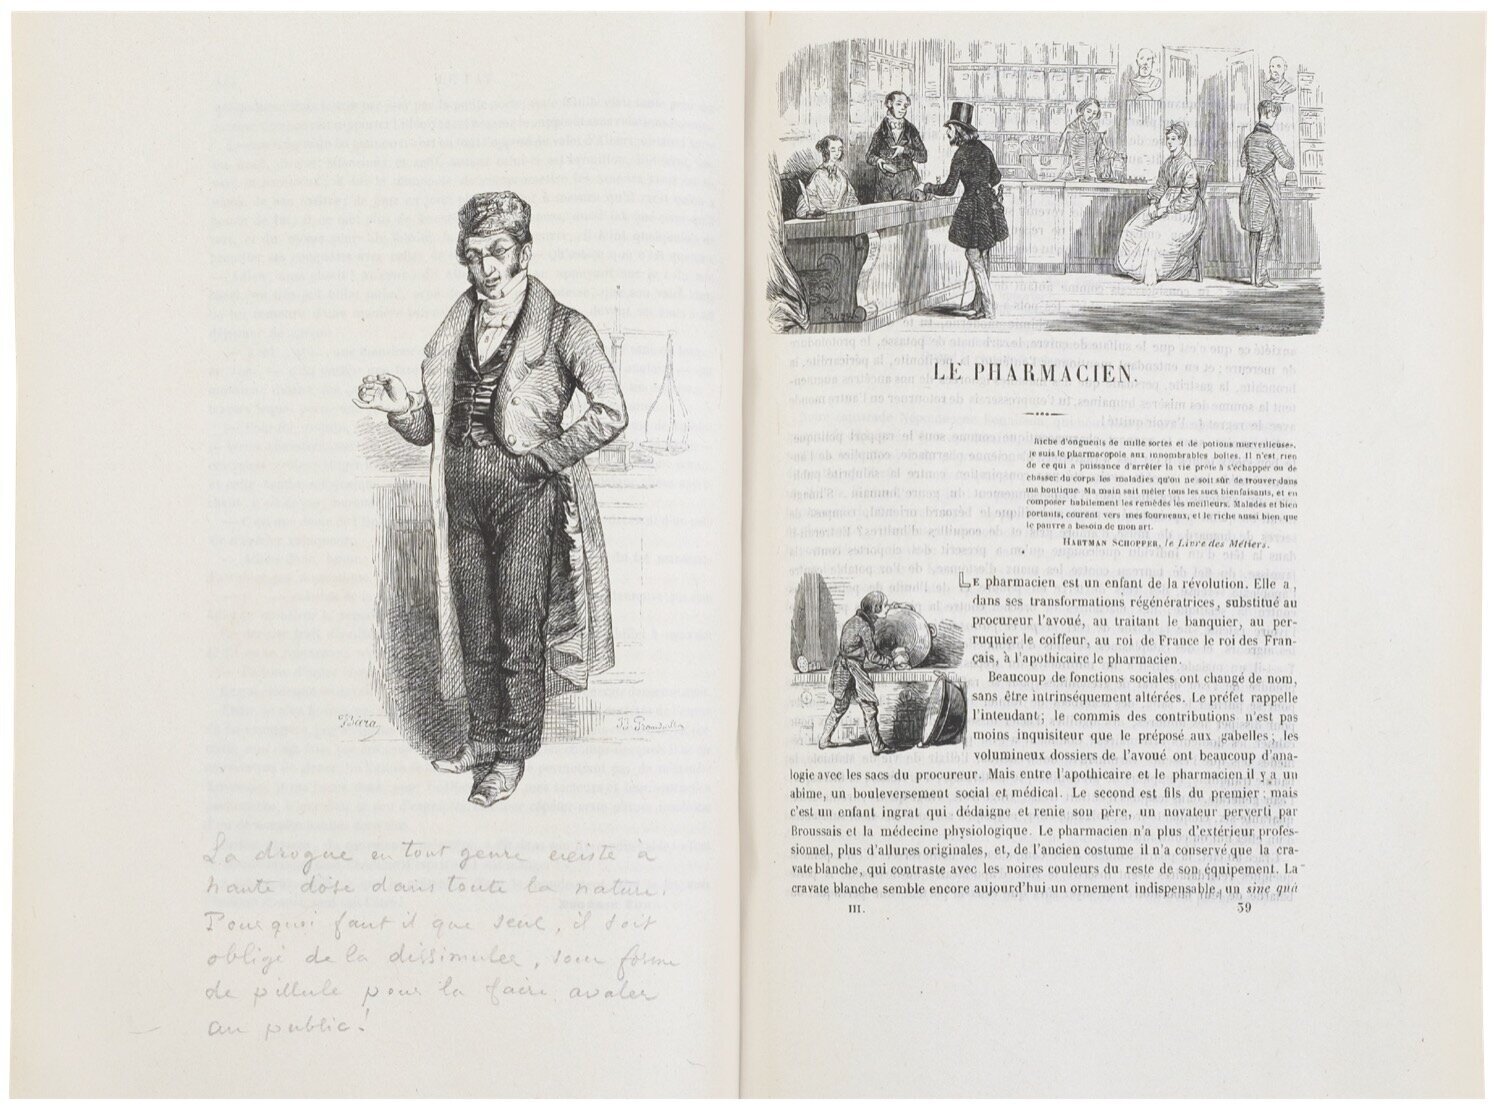  Gavarni’s copy on China paper, with a wealth of extra material including multiple sets of plates, proofs, and original drawings and watercolours [no. 212] 